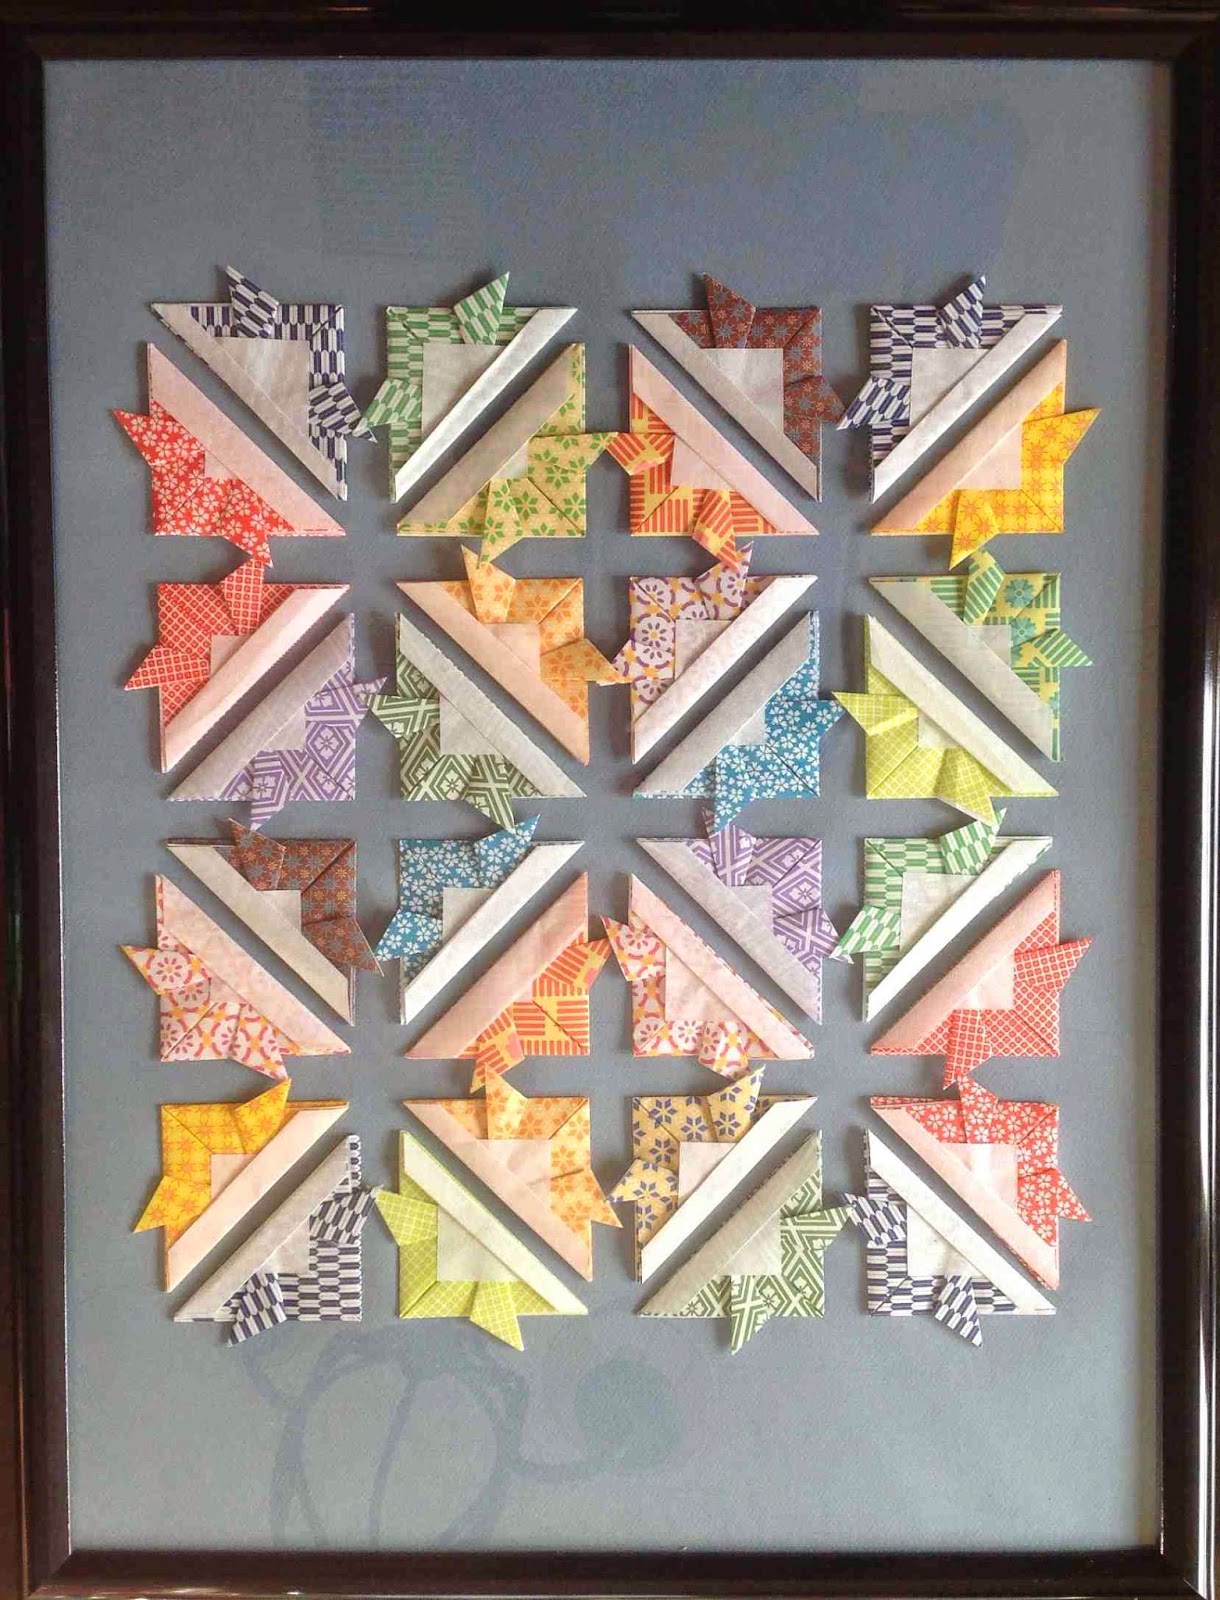 Create Art With Mrs. P! Make a quilt in an eveningA PAPER ORIGAMI